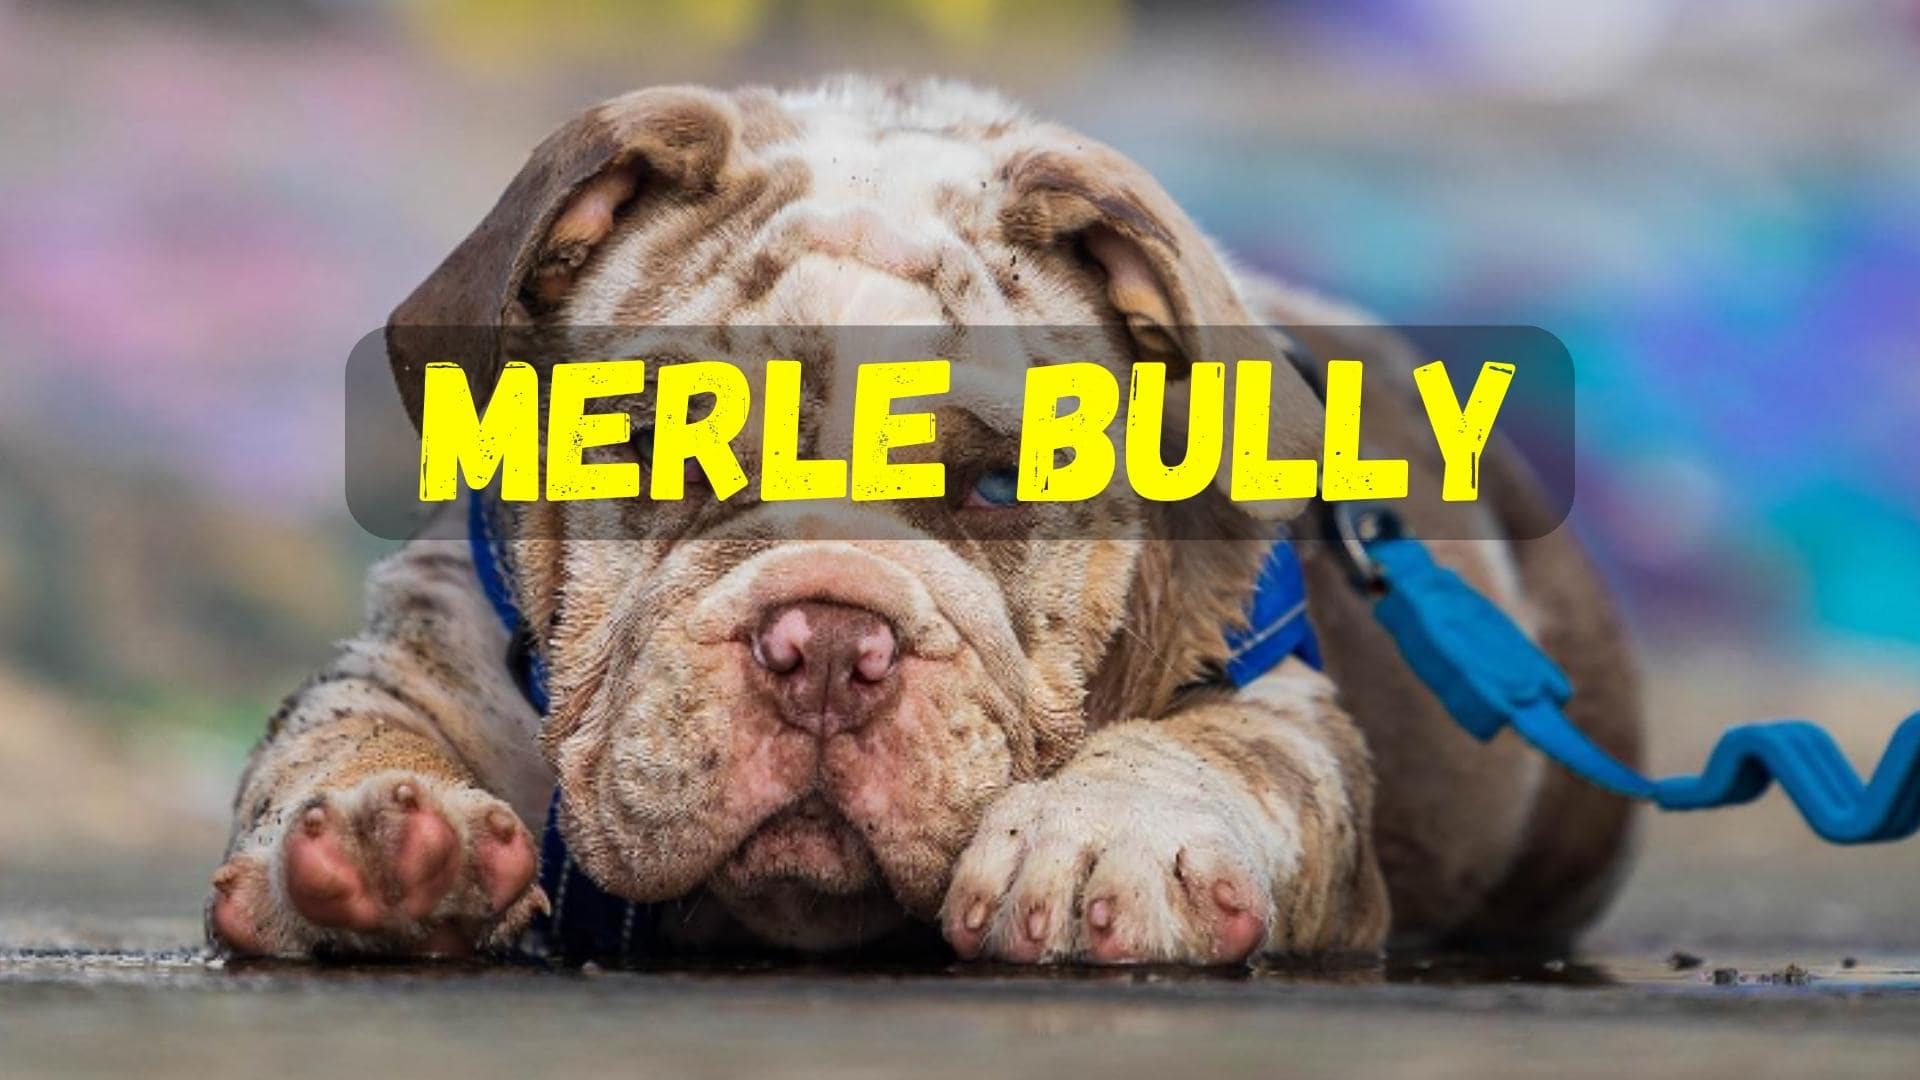 The Merle Bully: Simple Guide To These Controversial Dogs